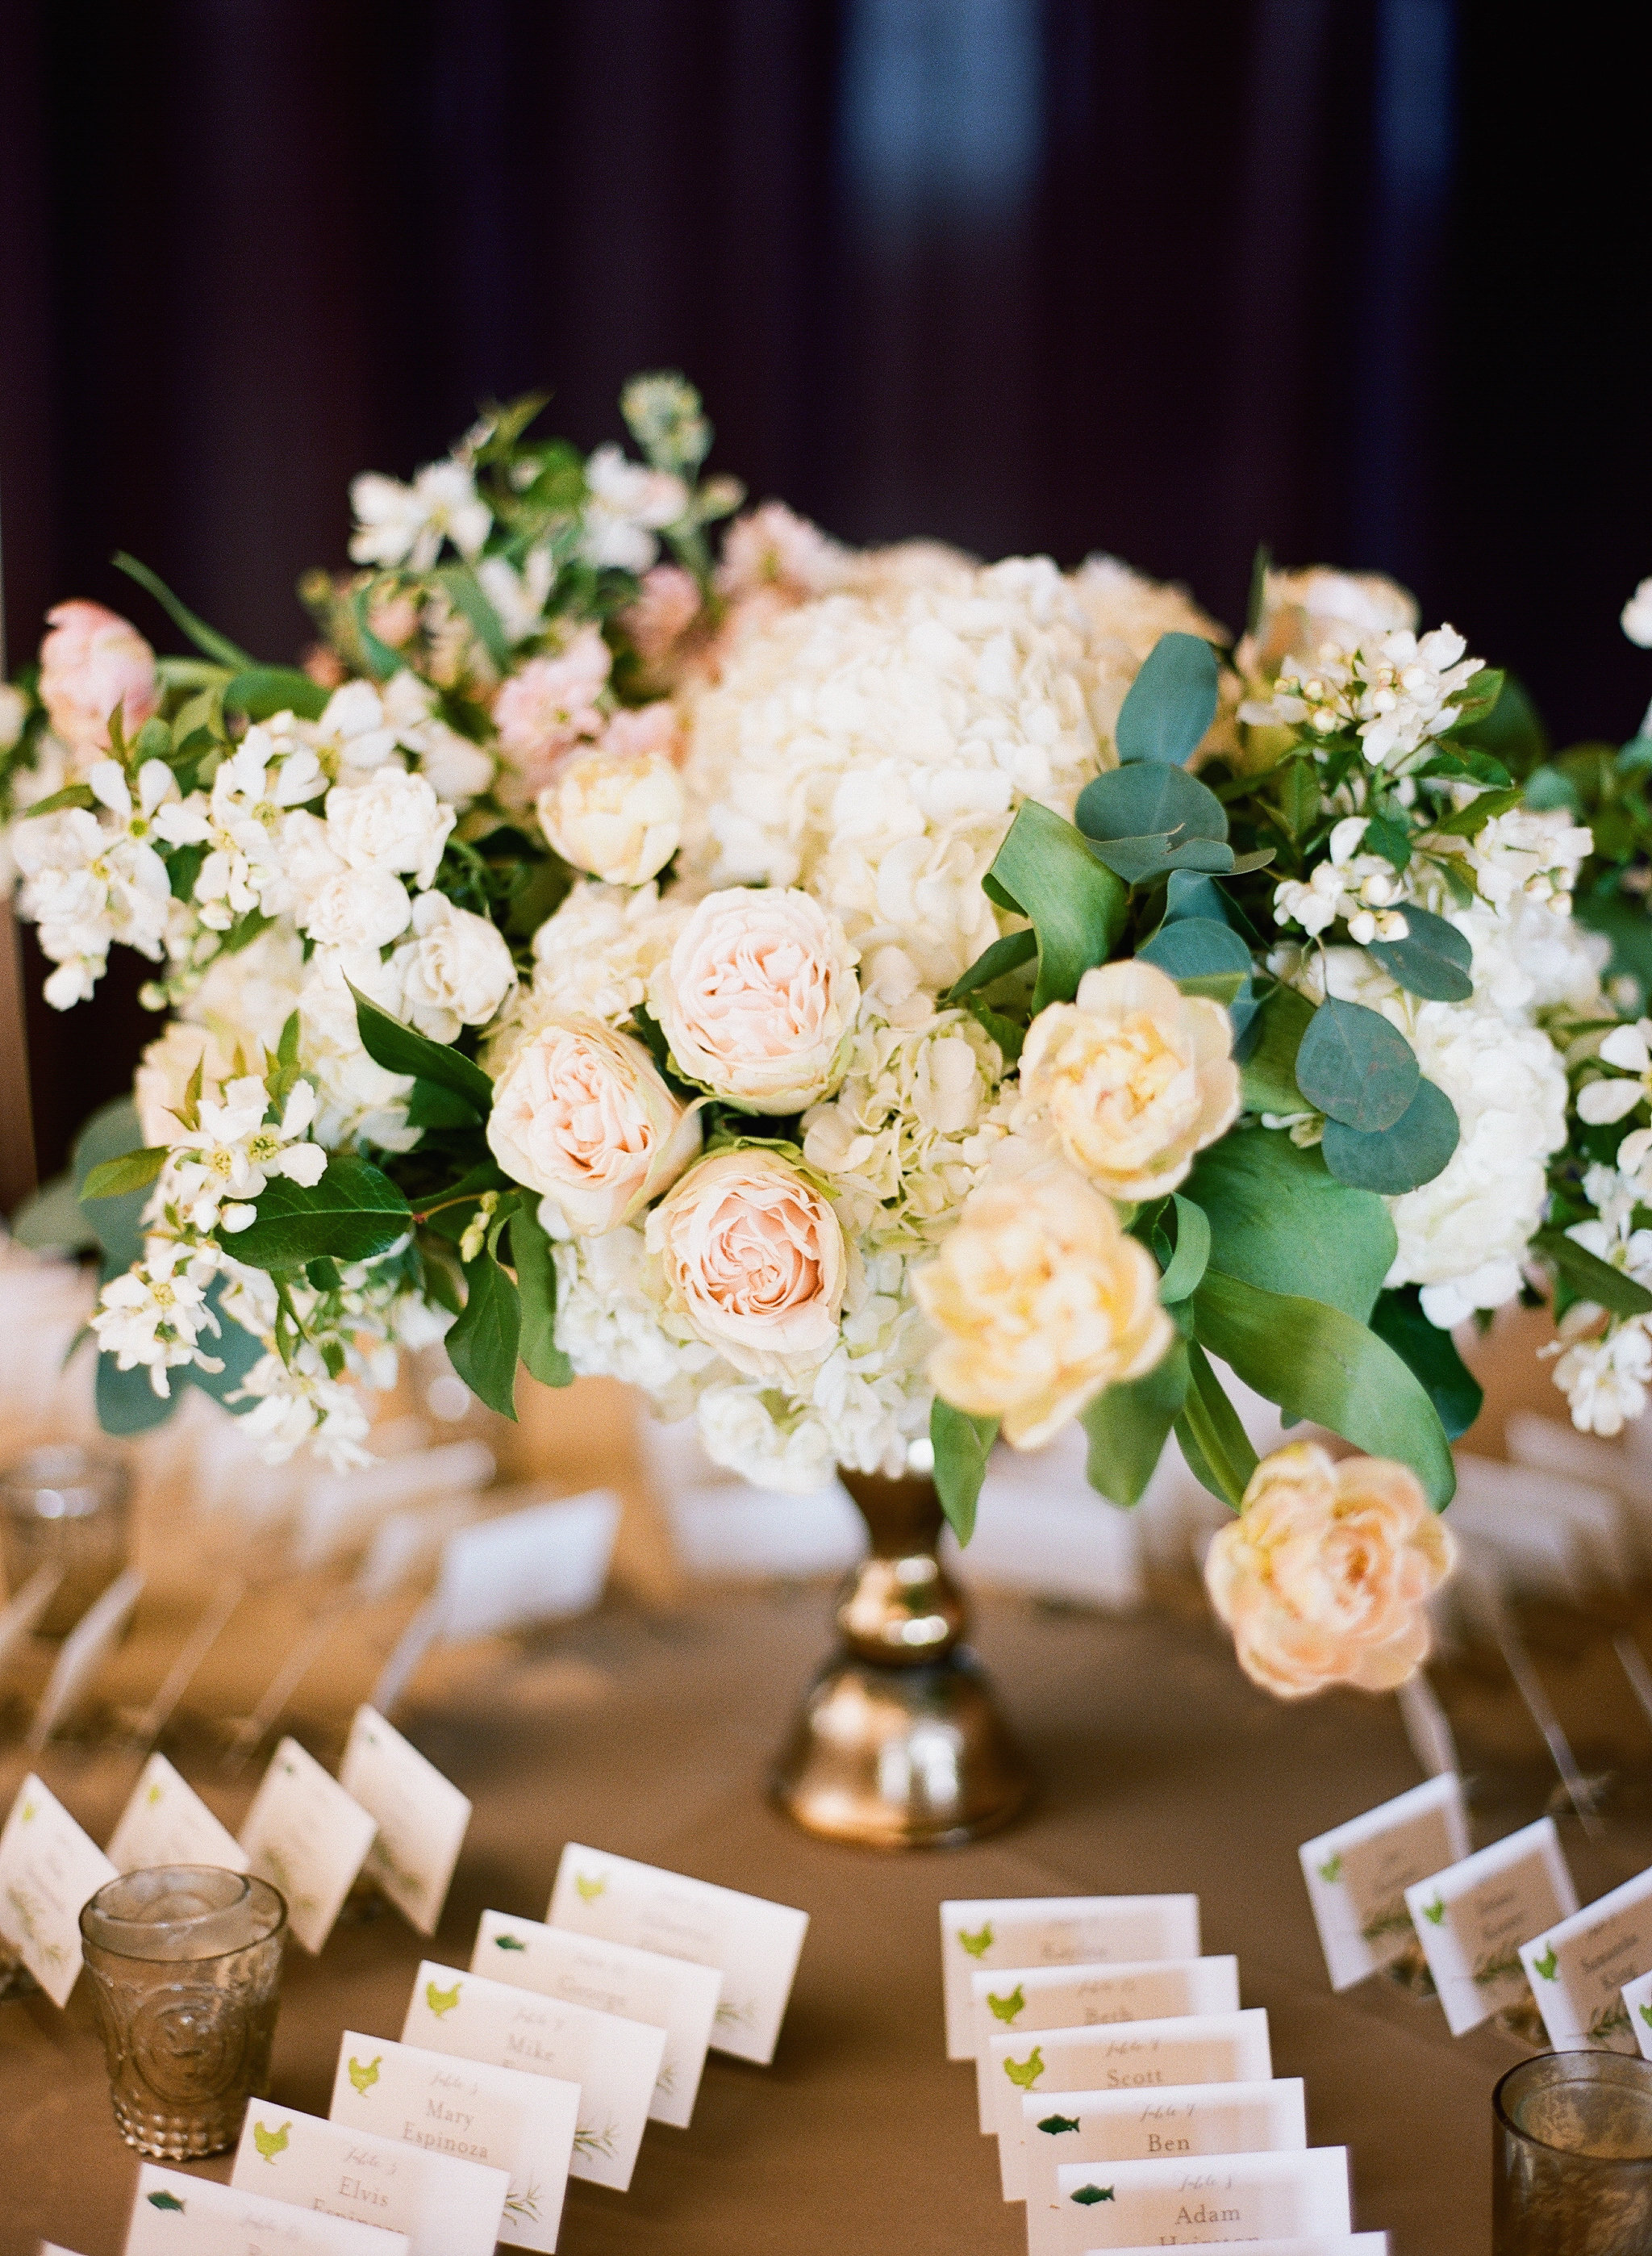 Escort card table flower arrangement for spring wedding with flowering branches, garden roses, tulips in gold vase.